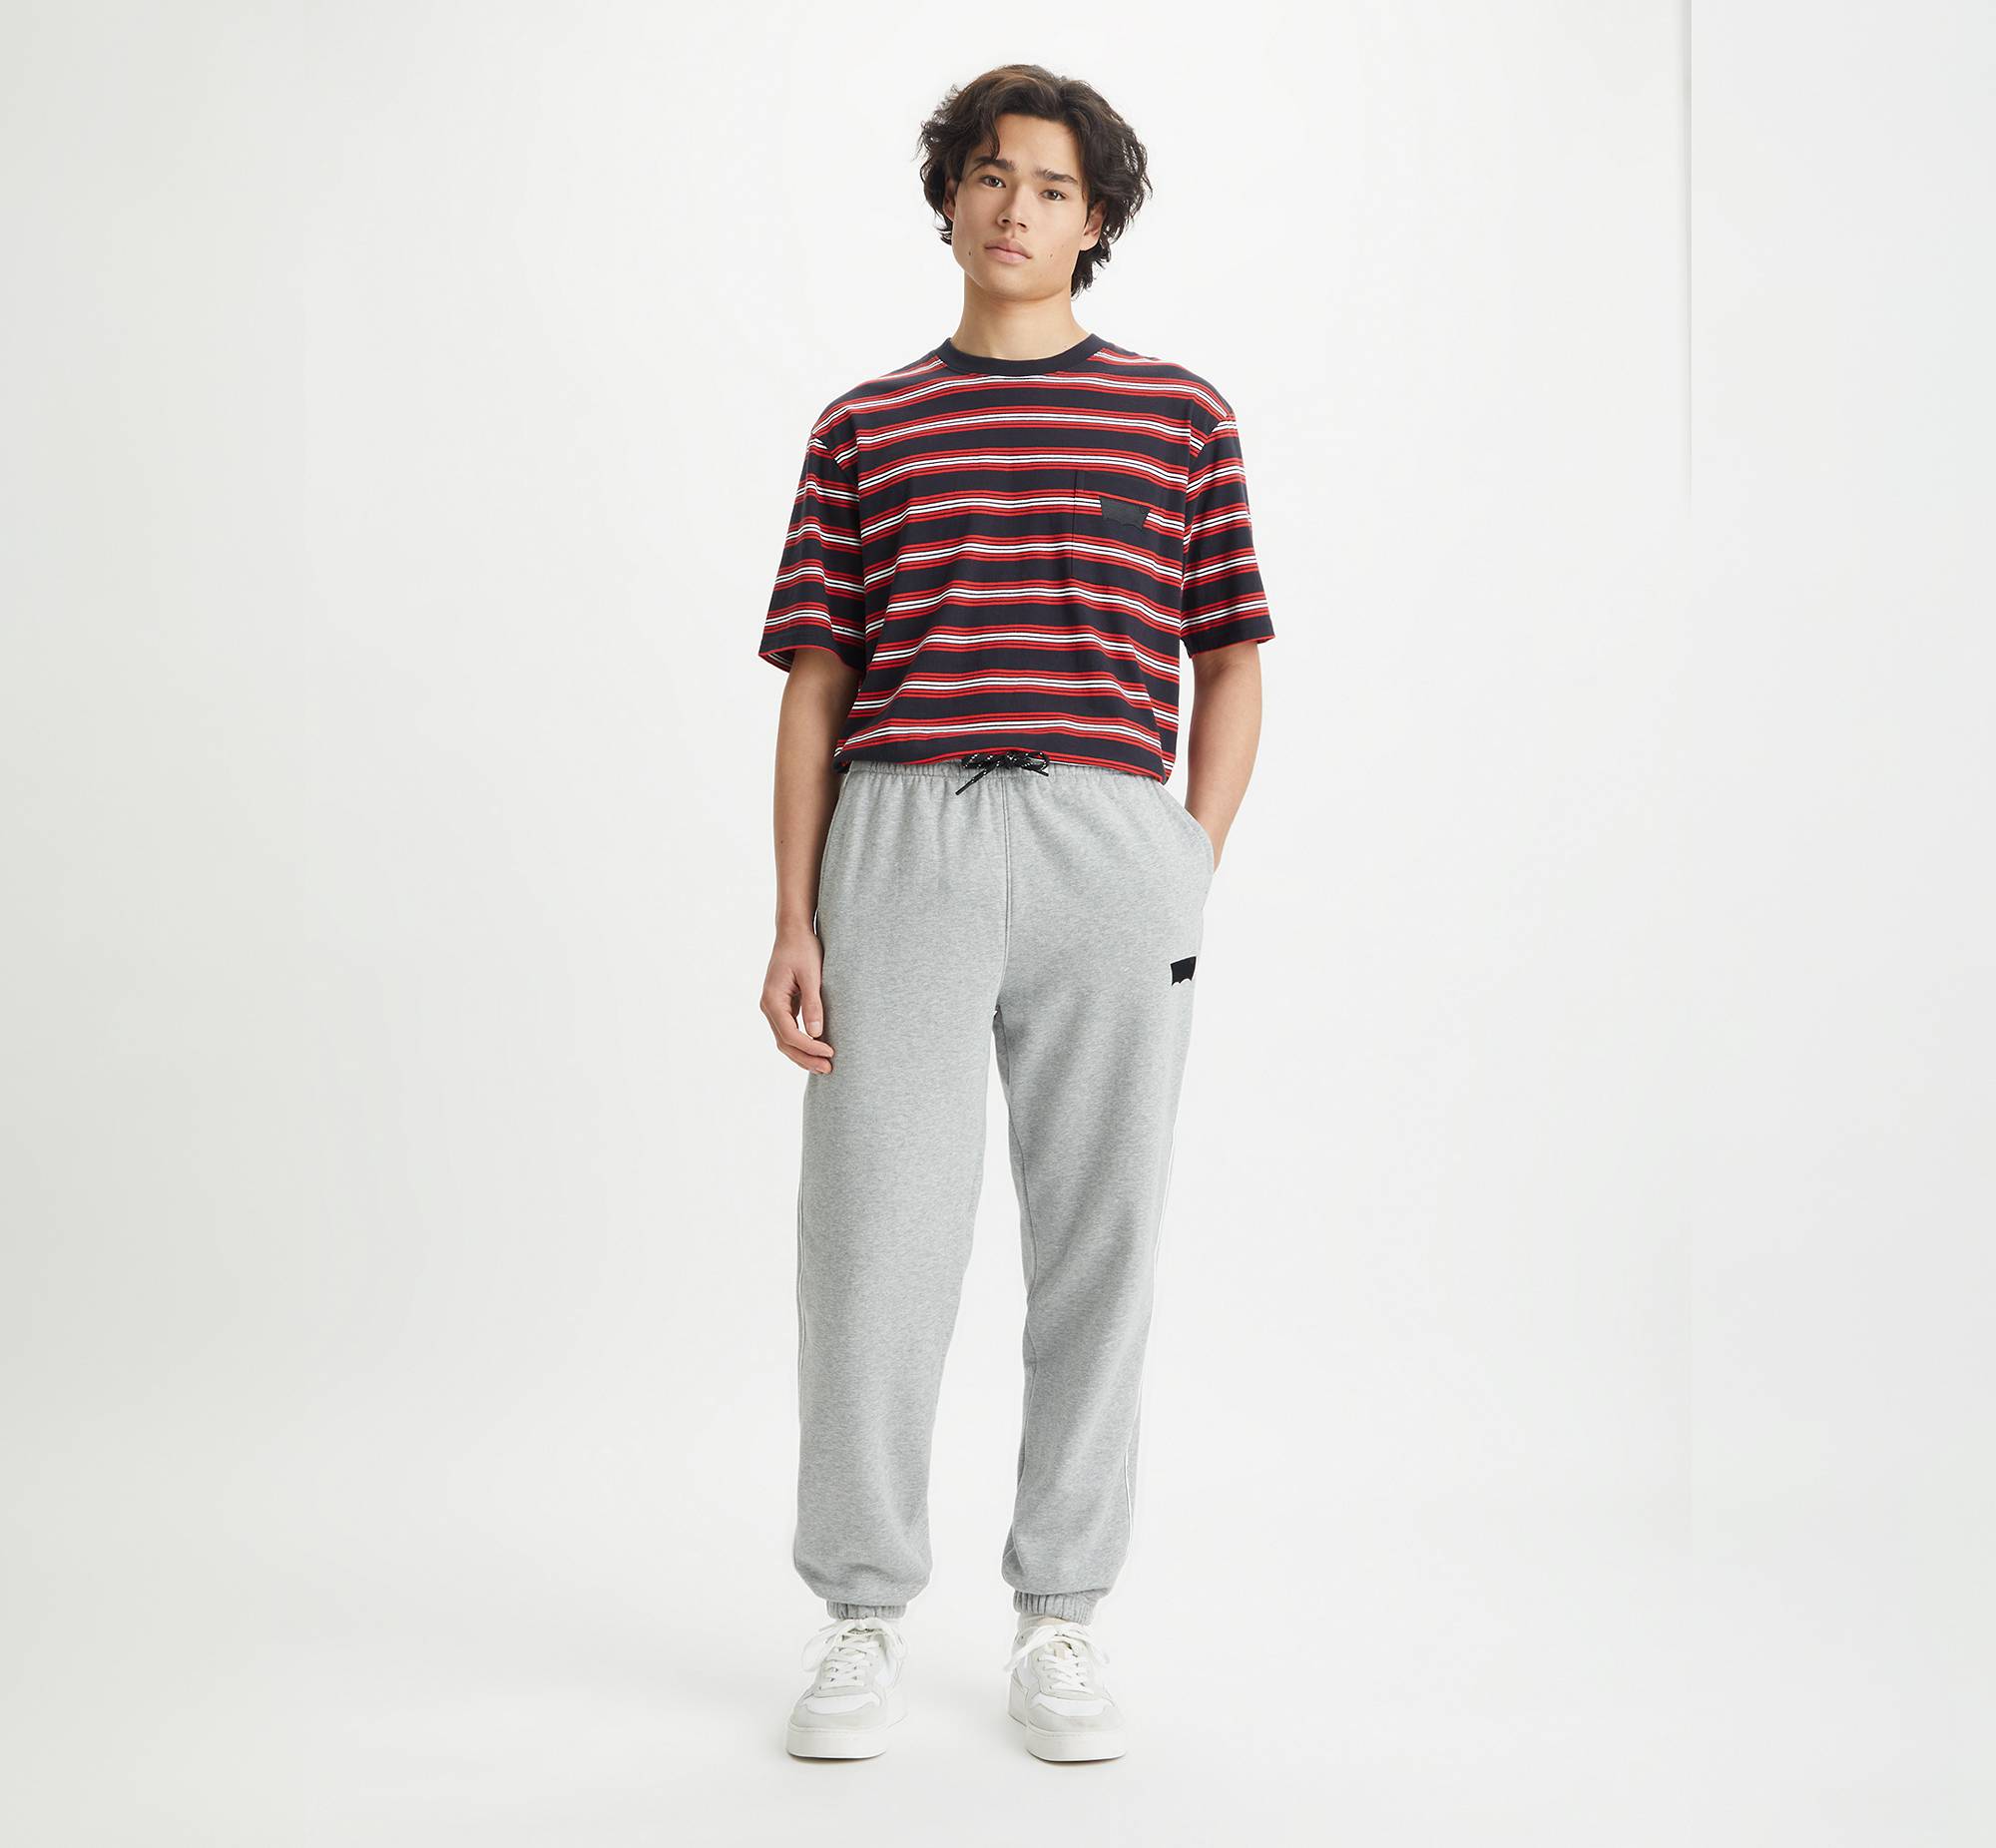 Graphic Piping Sweatpant 1